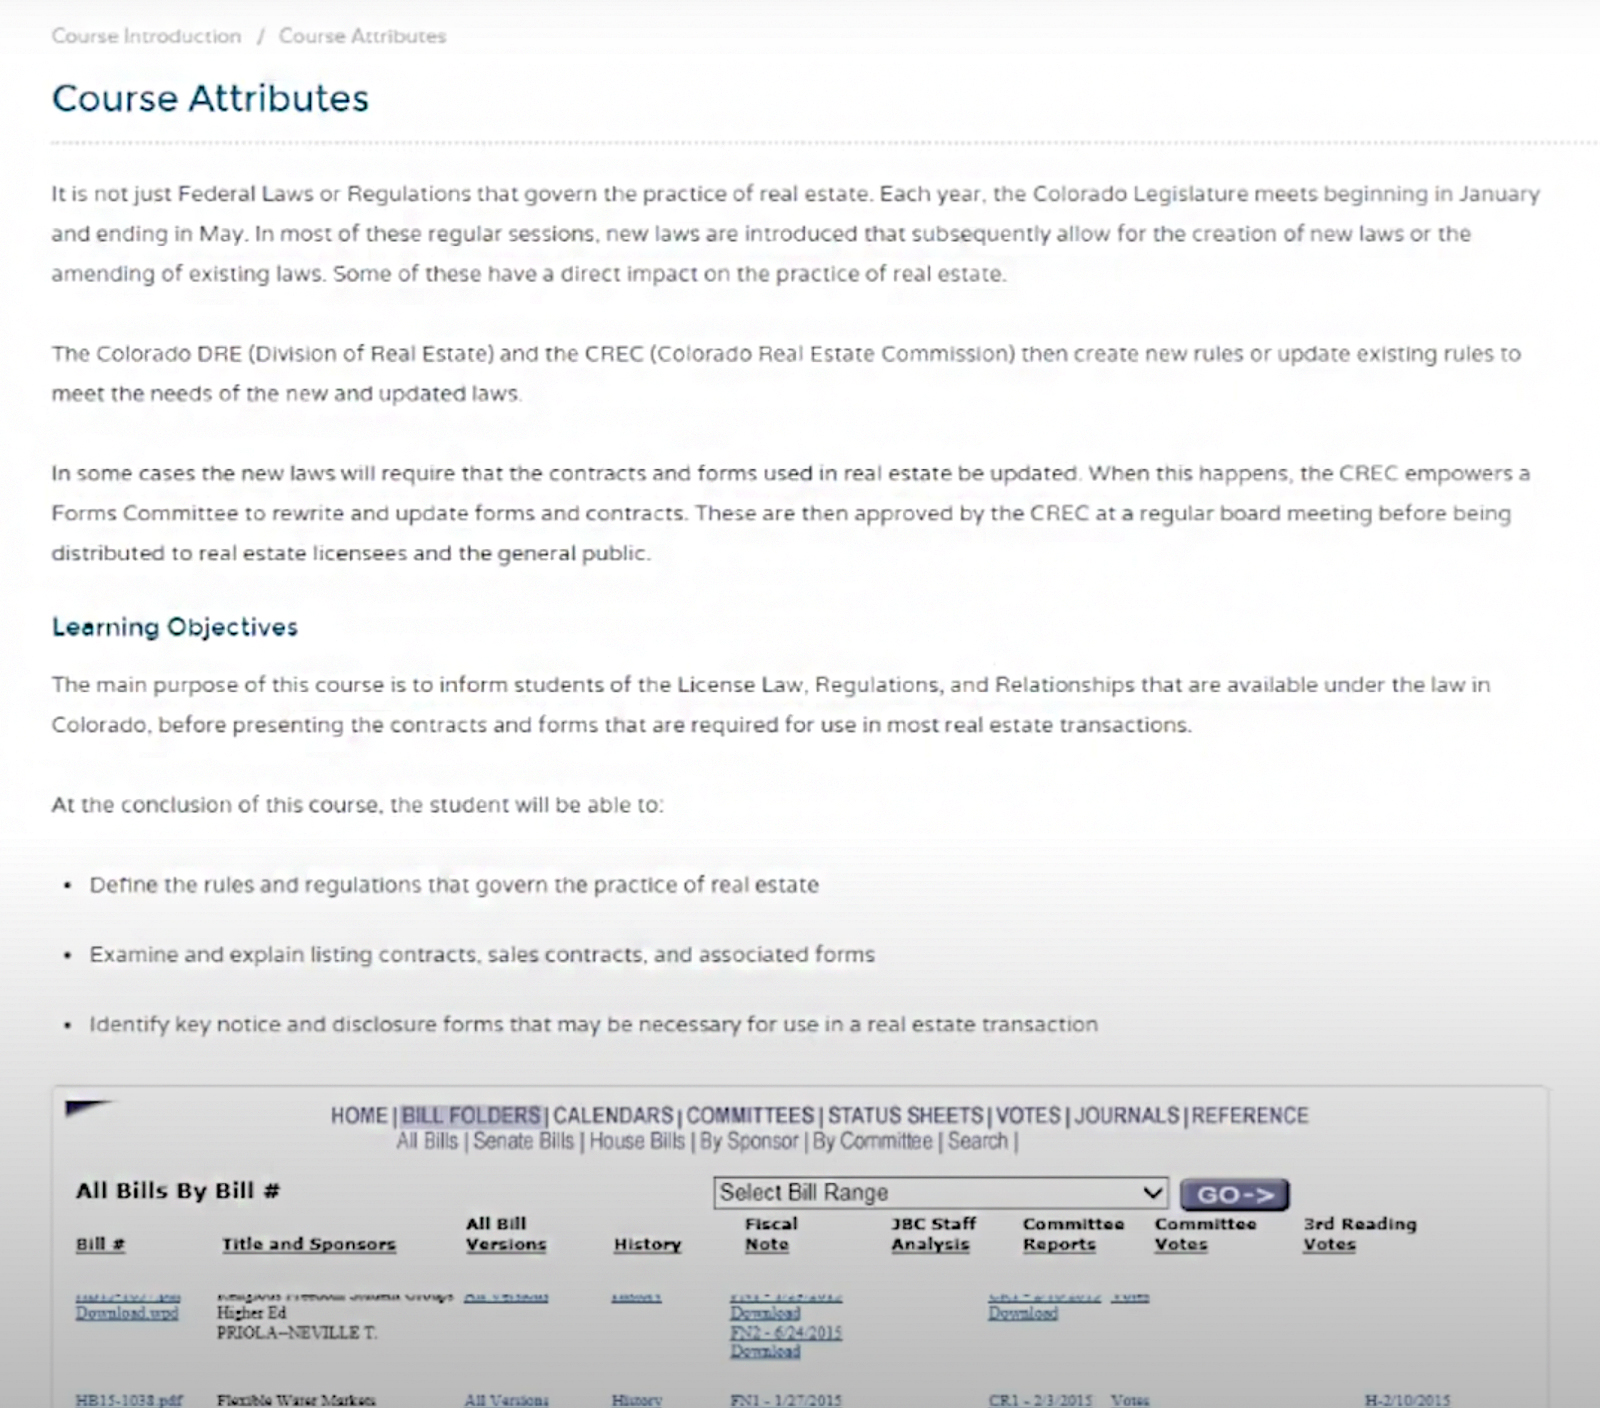 Van Education Center student dashboard with title "course attributes".